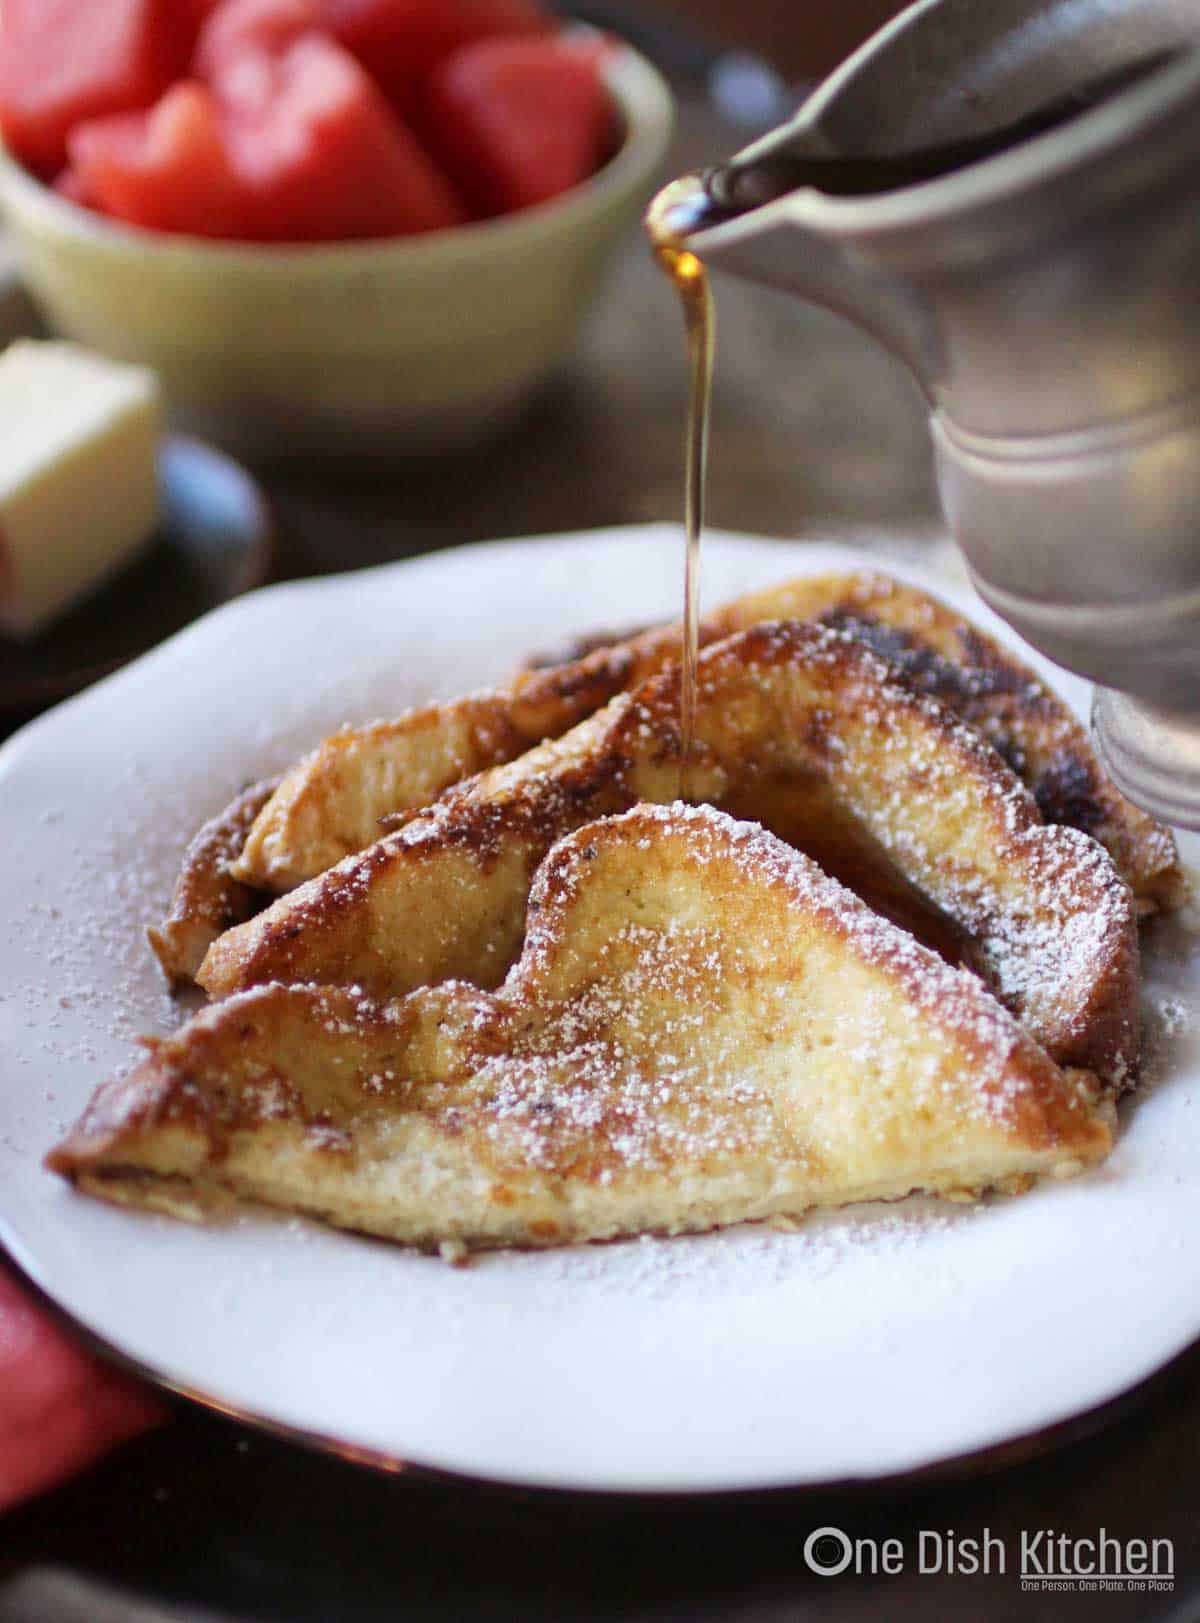 A plate of three slices of french toast dusted with powdered sugar being drizzled with maple syrup